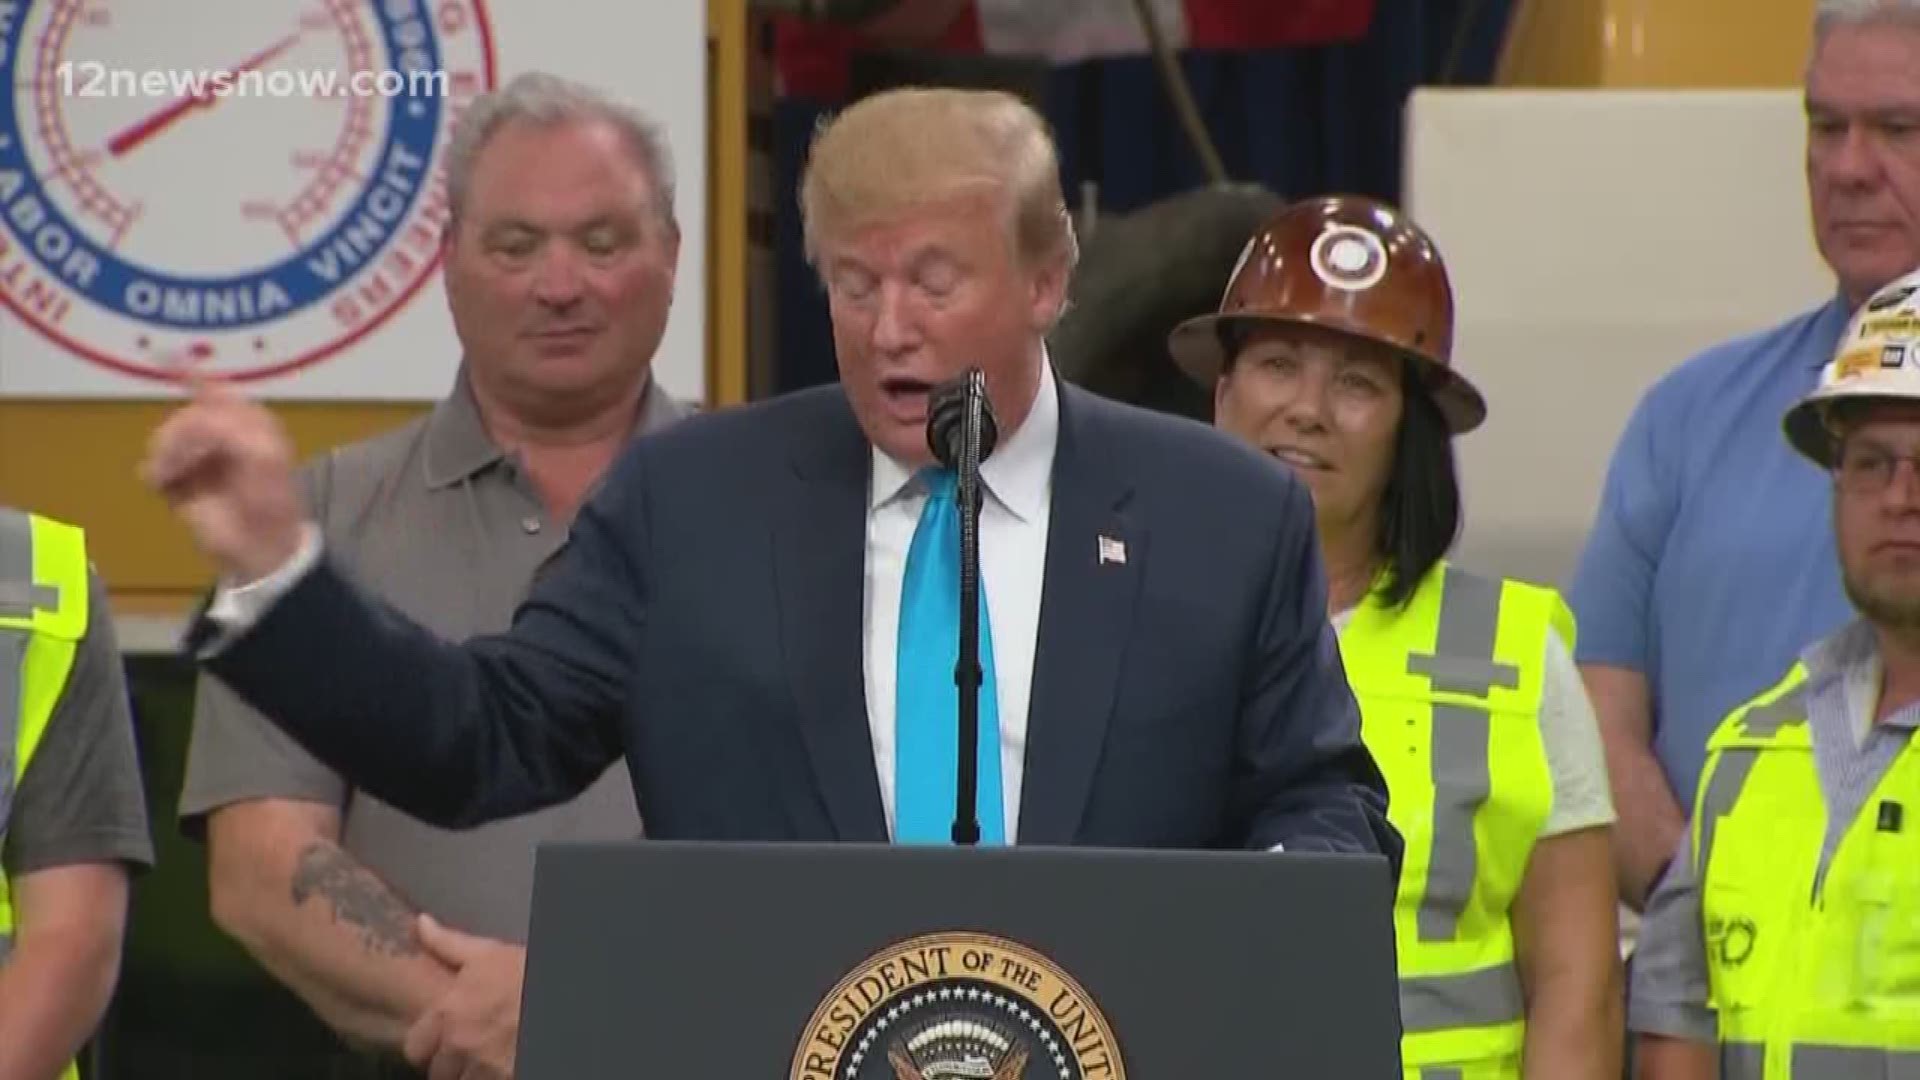 President Trump was met with cheers when he stopped by Crosby during his tour around Texas to put into place new energy projects that he believes will be very beneficial and create many jobs.